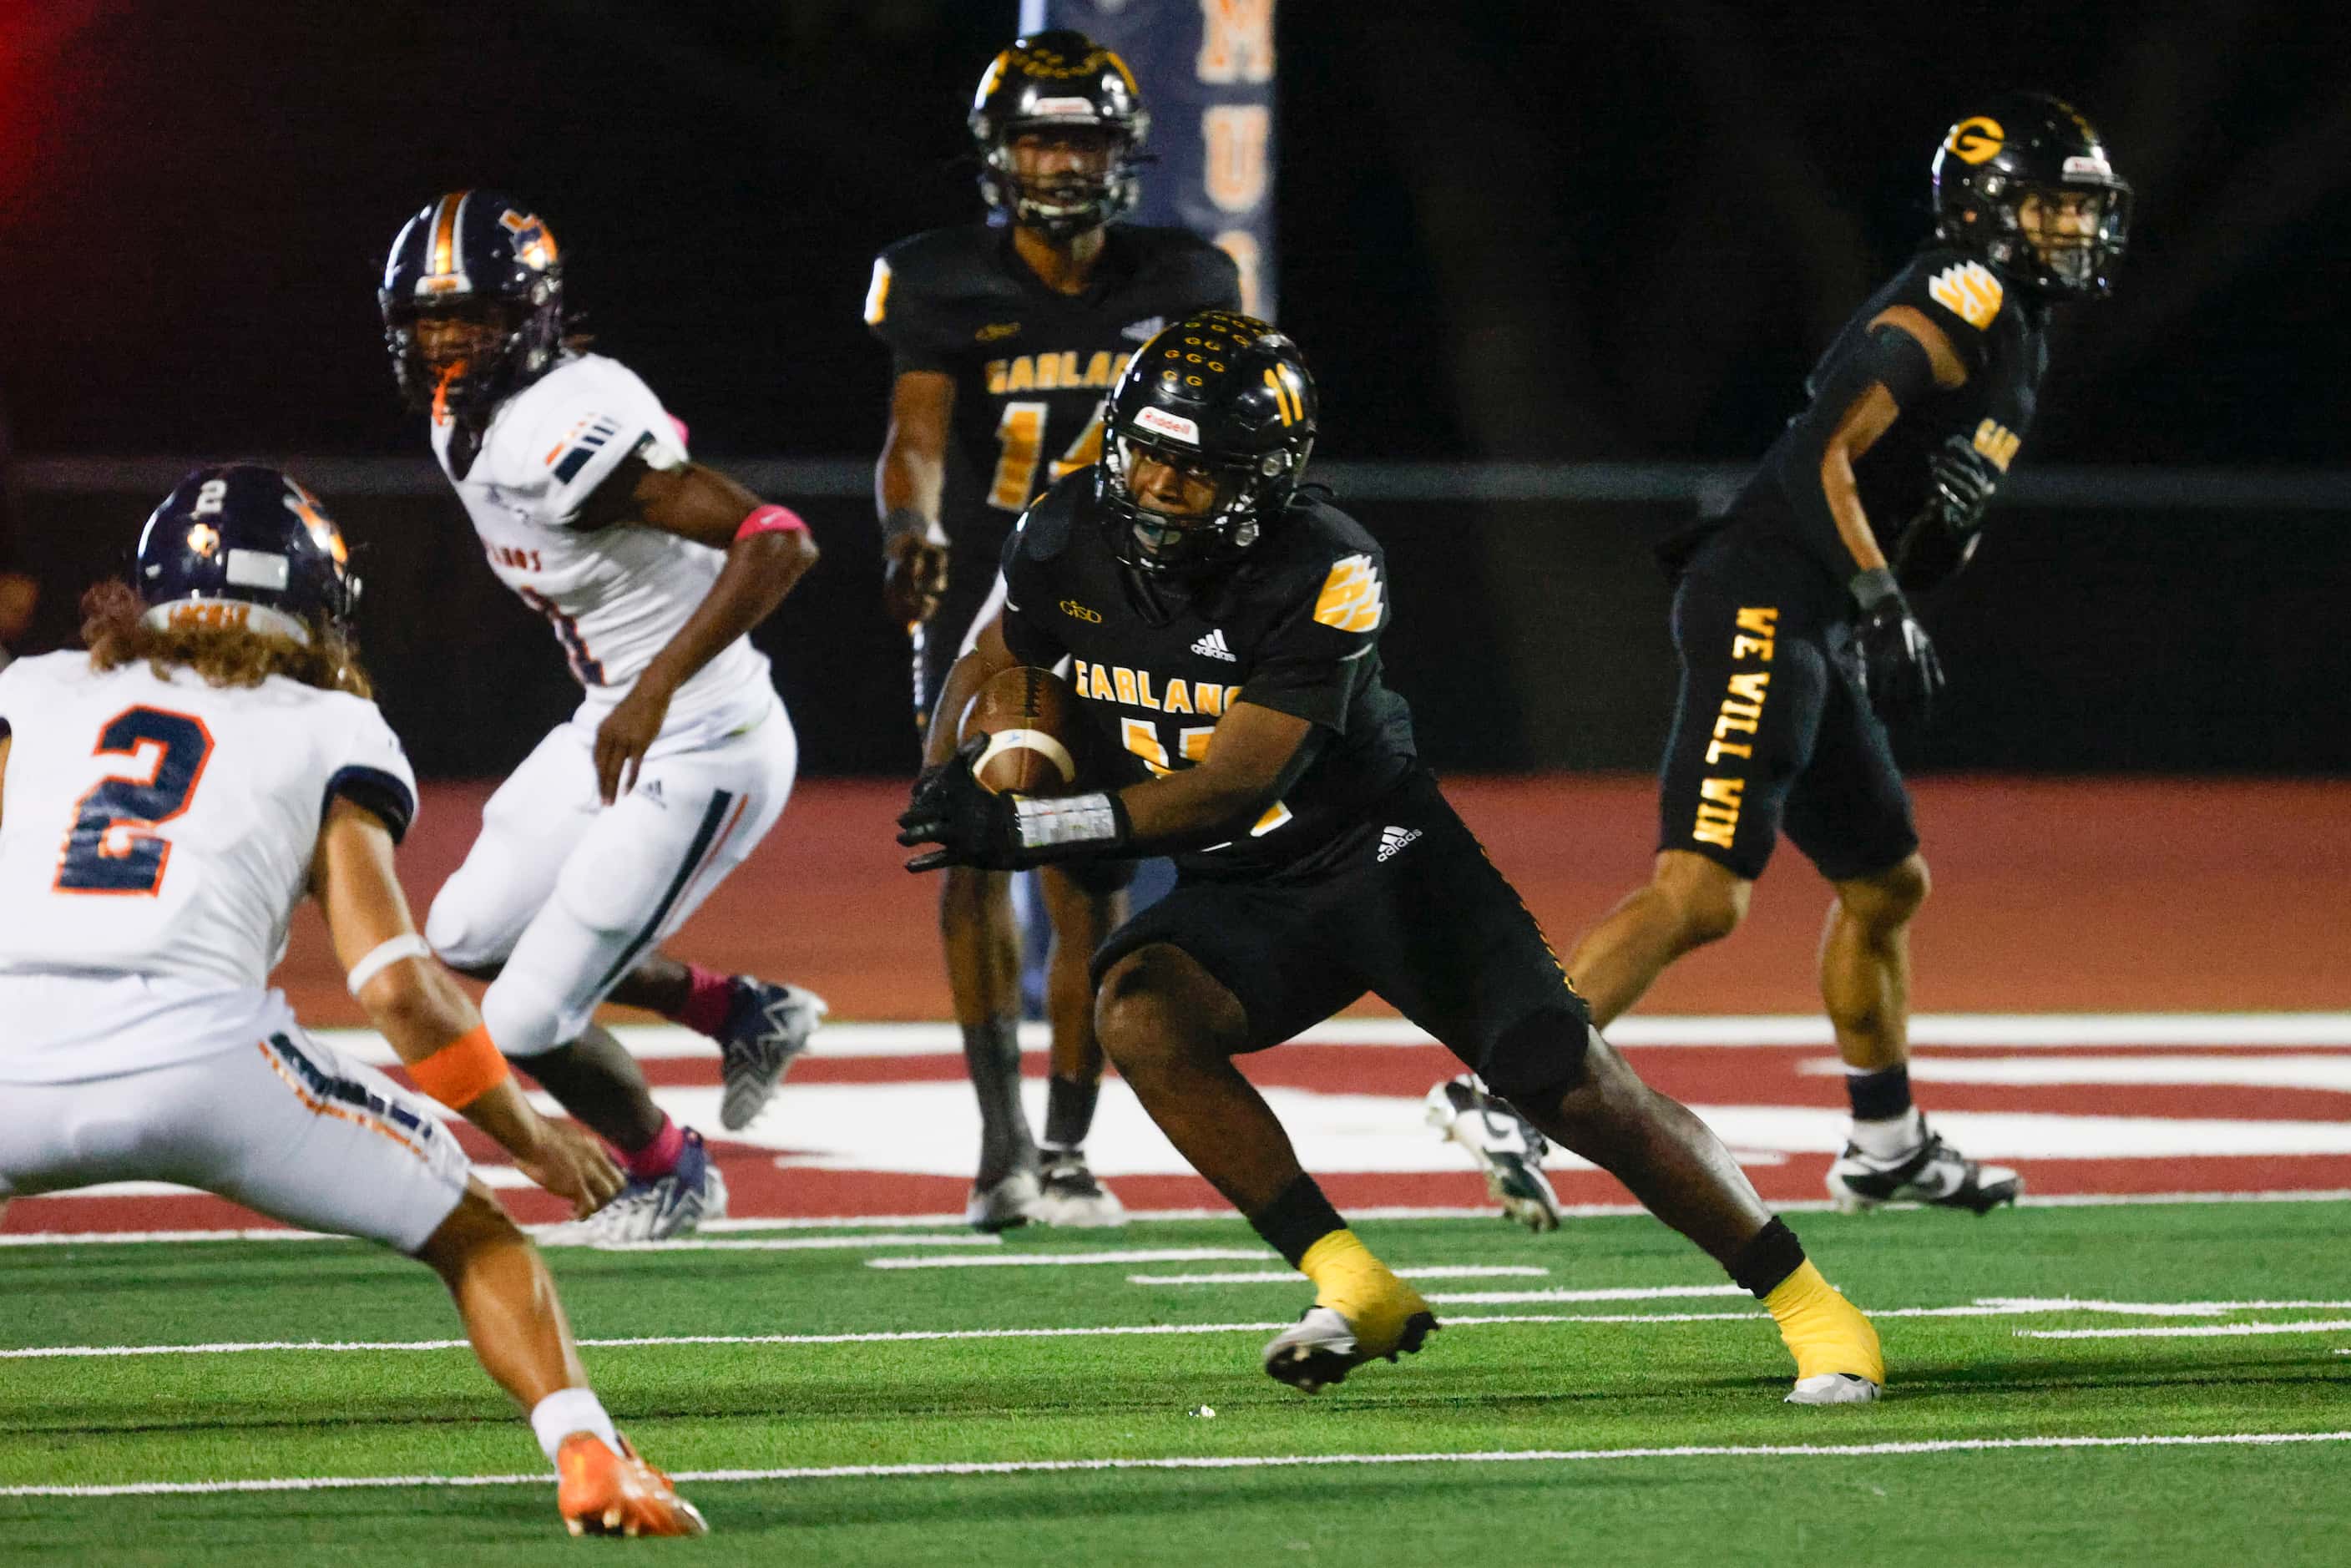 Garland High school’s De’Adrian Hardy runs with the ball during the second half of a...